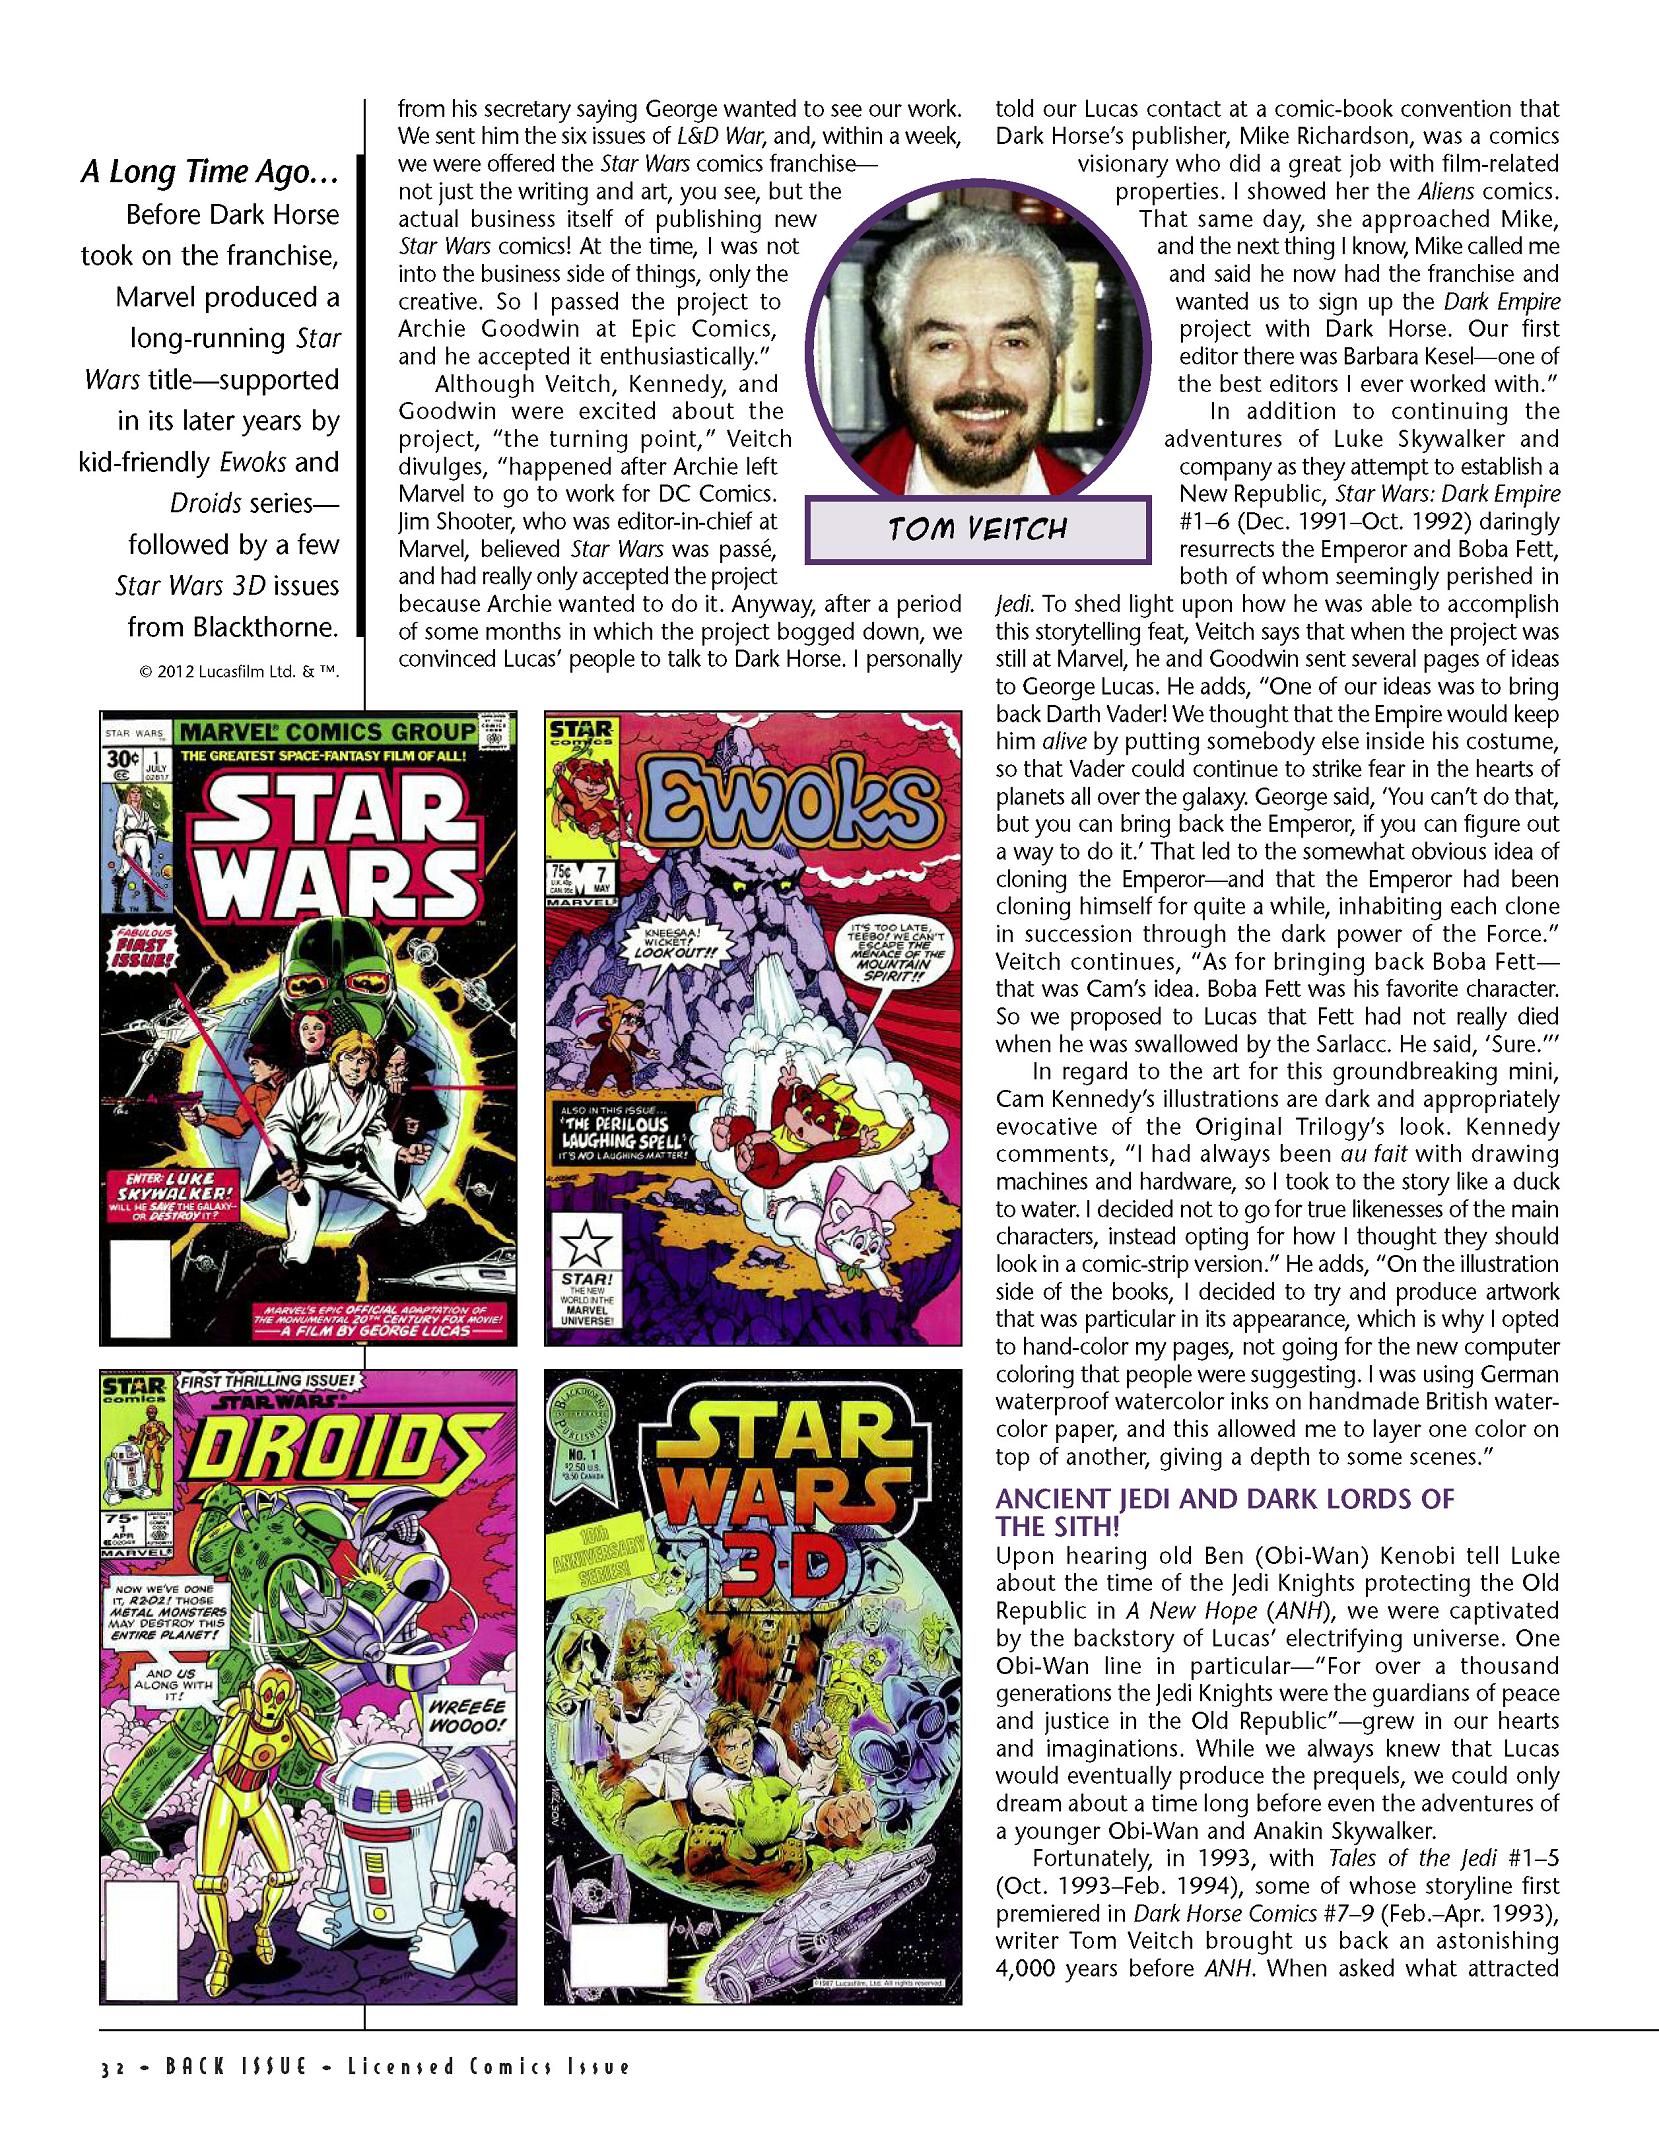 Read online Back Issue comic -  Issue #55 - 32